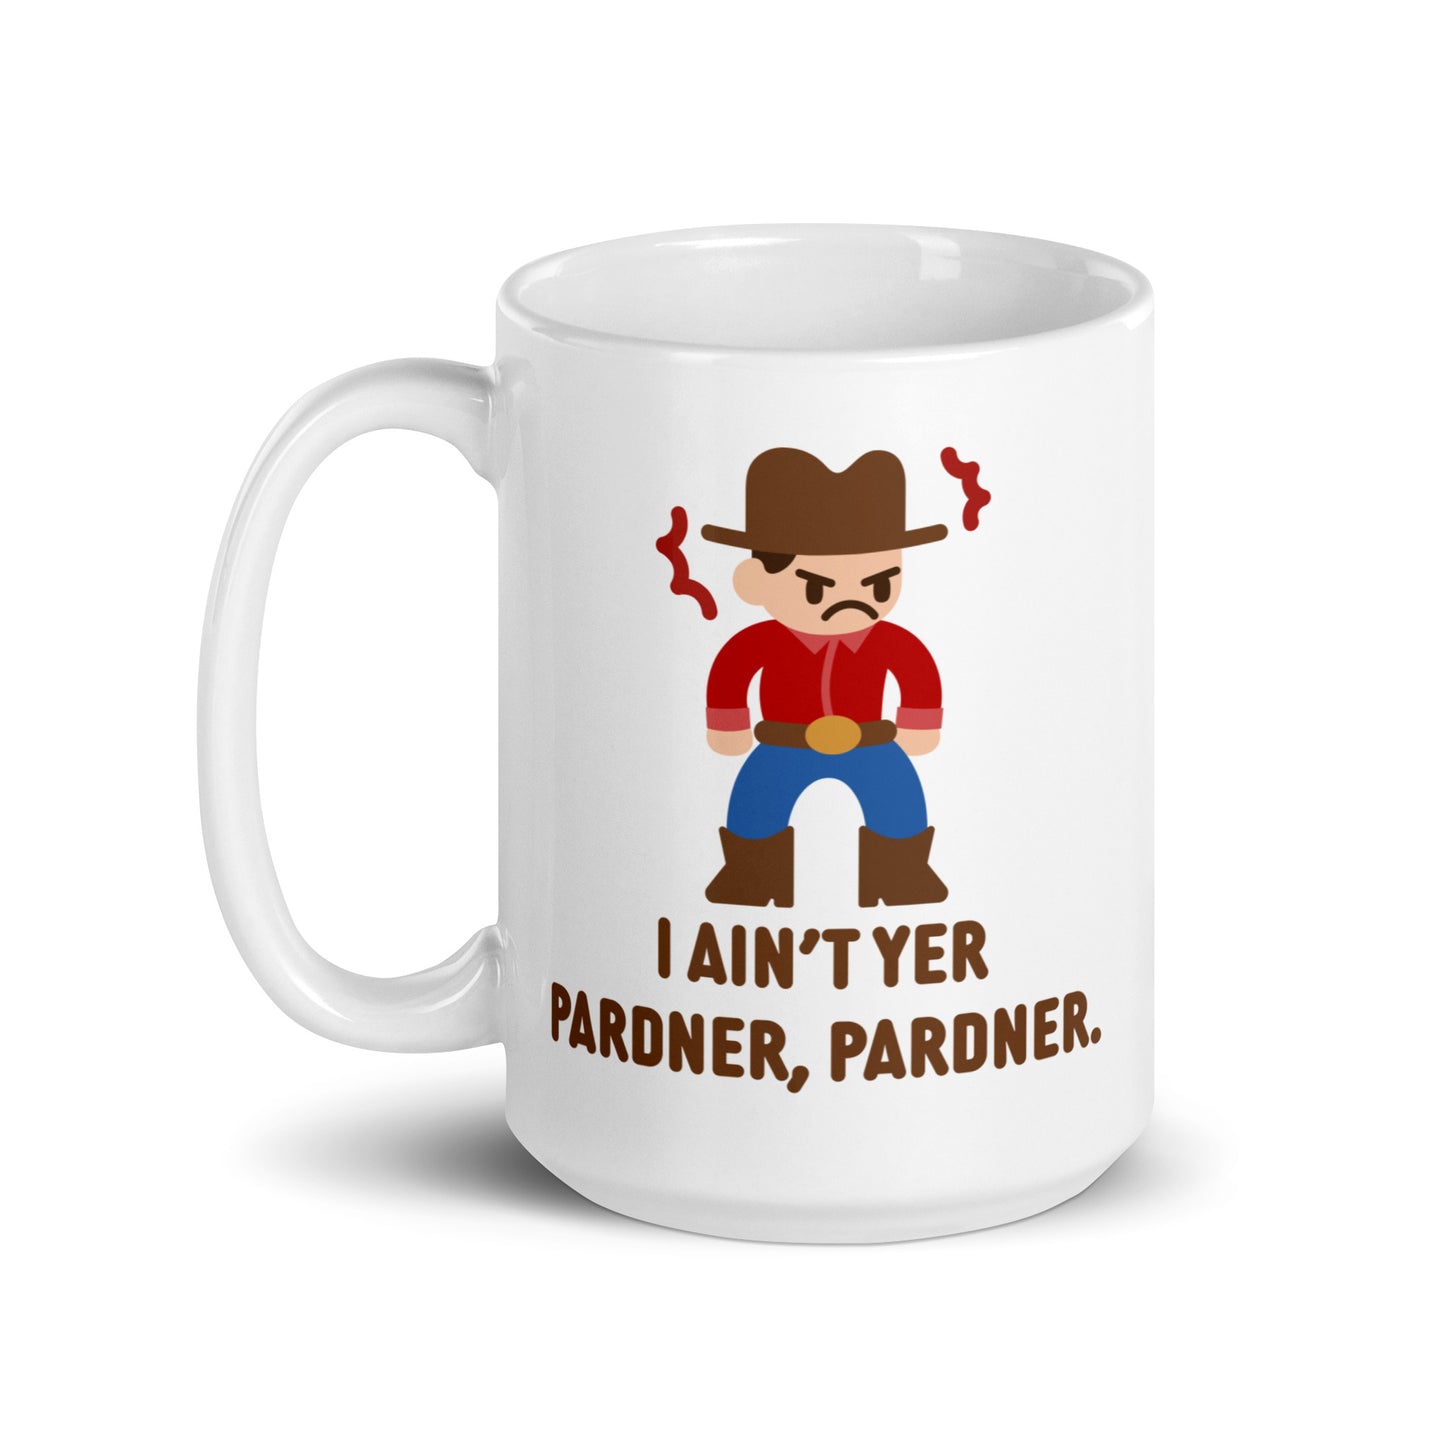 A white 15 ounce ceramic coffee mug featuring an illustration of a grumpy cowboy wearing a red shirt. Text beneath the cowboy reads "I ain't yer pardner, pardner."